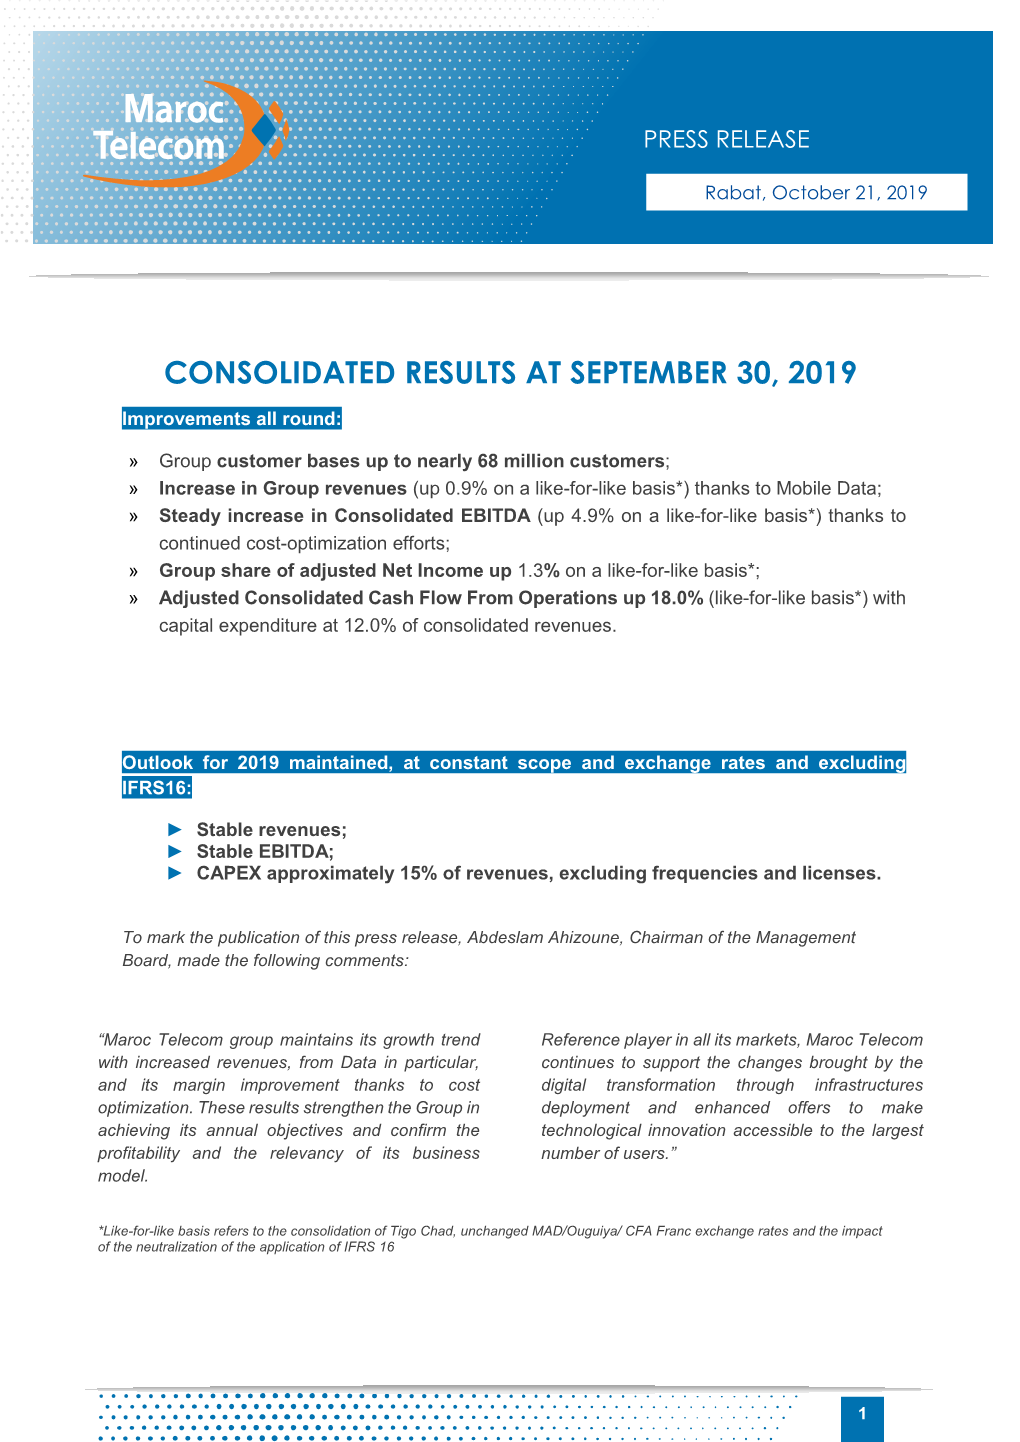 Consolidated Results at September 30, 2019